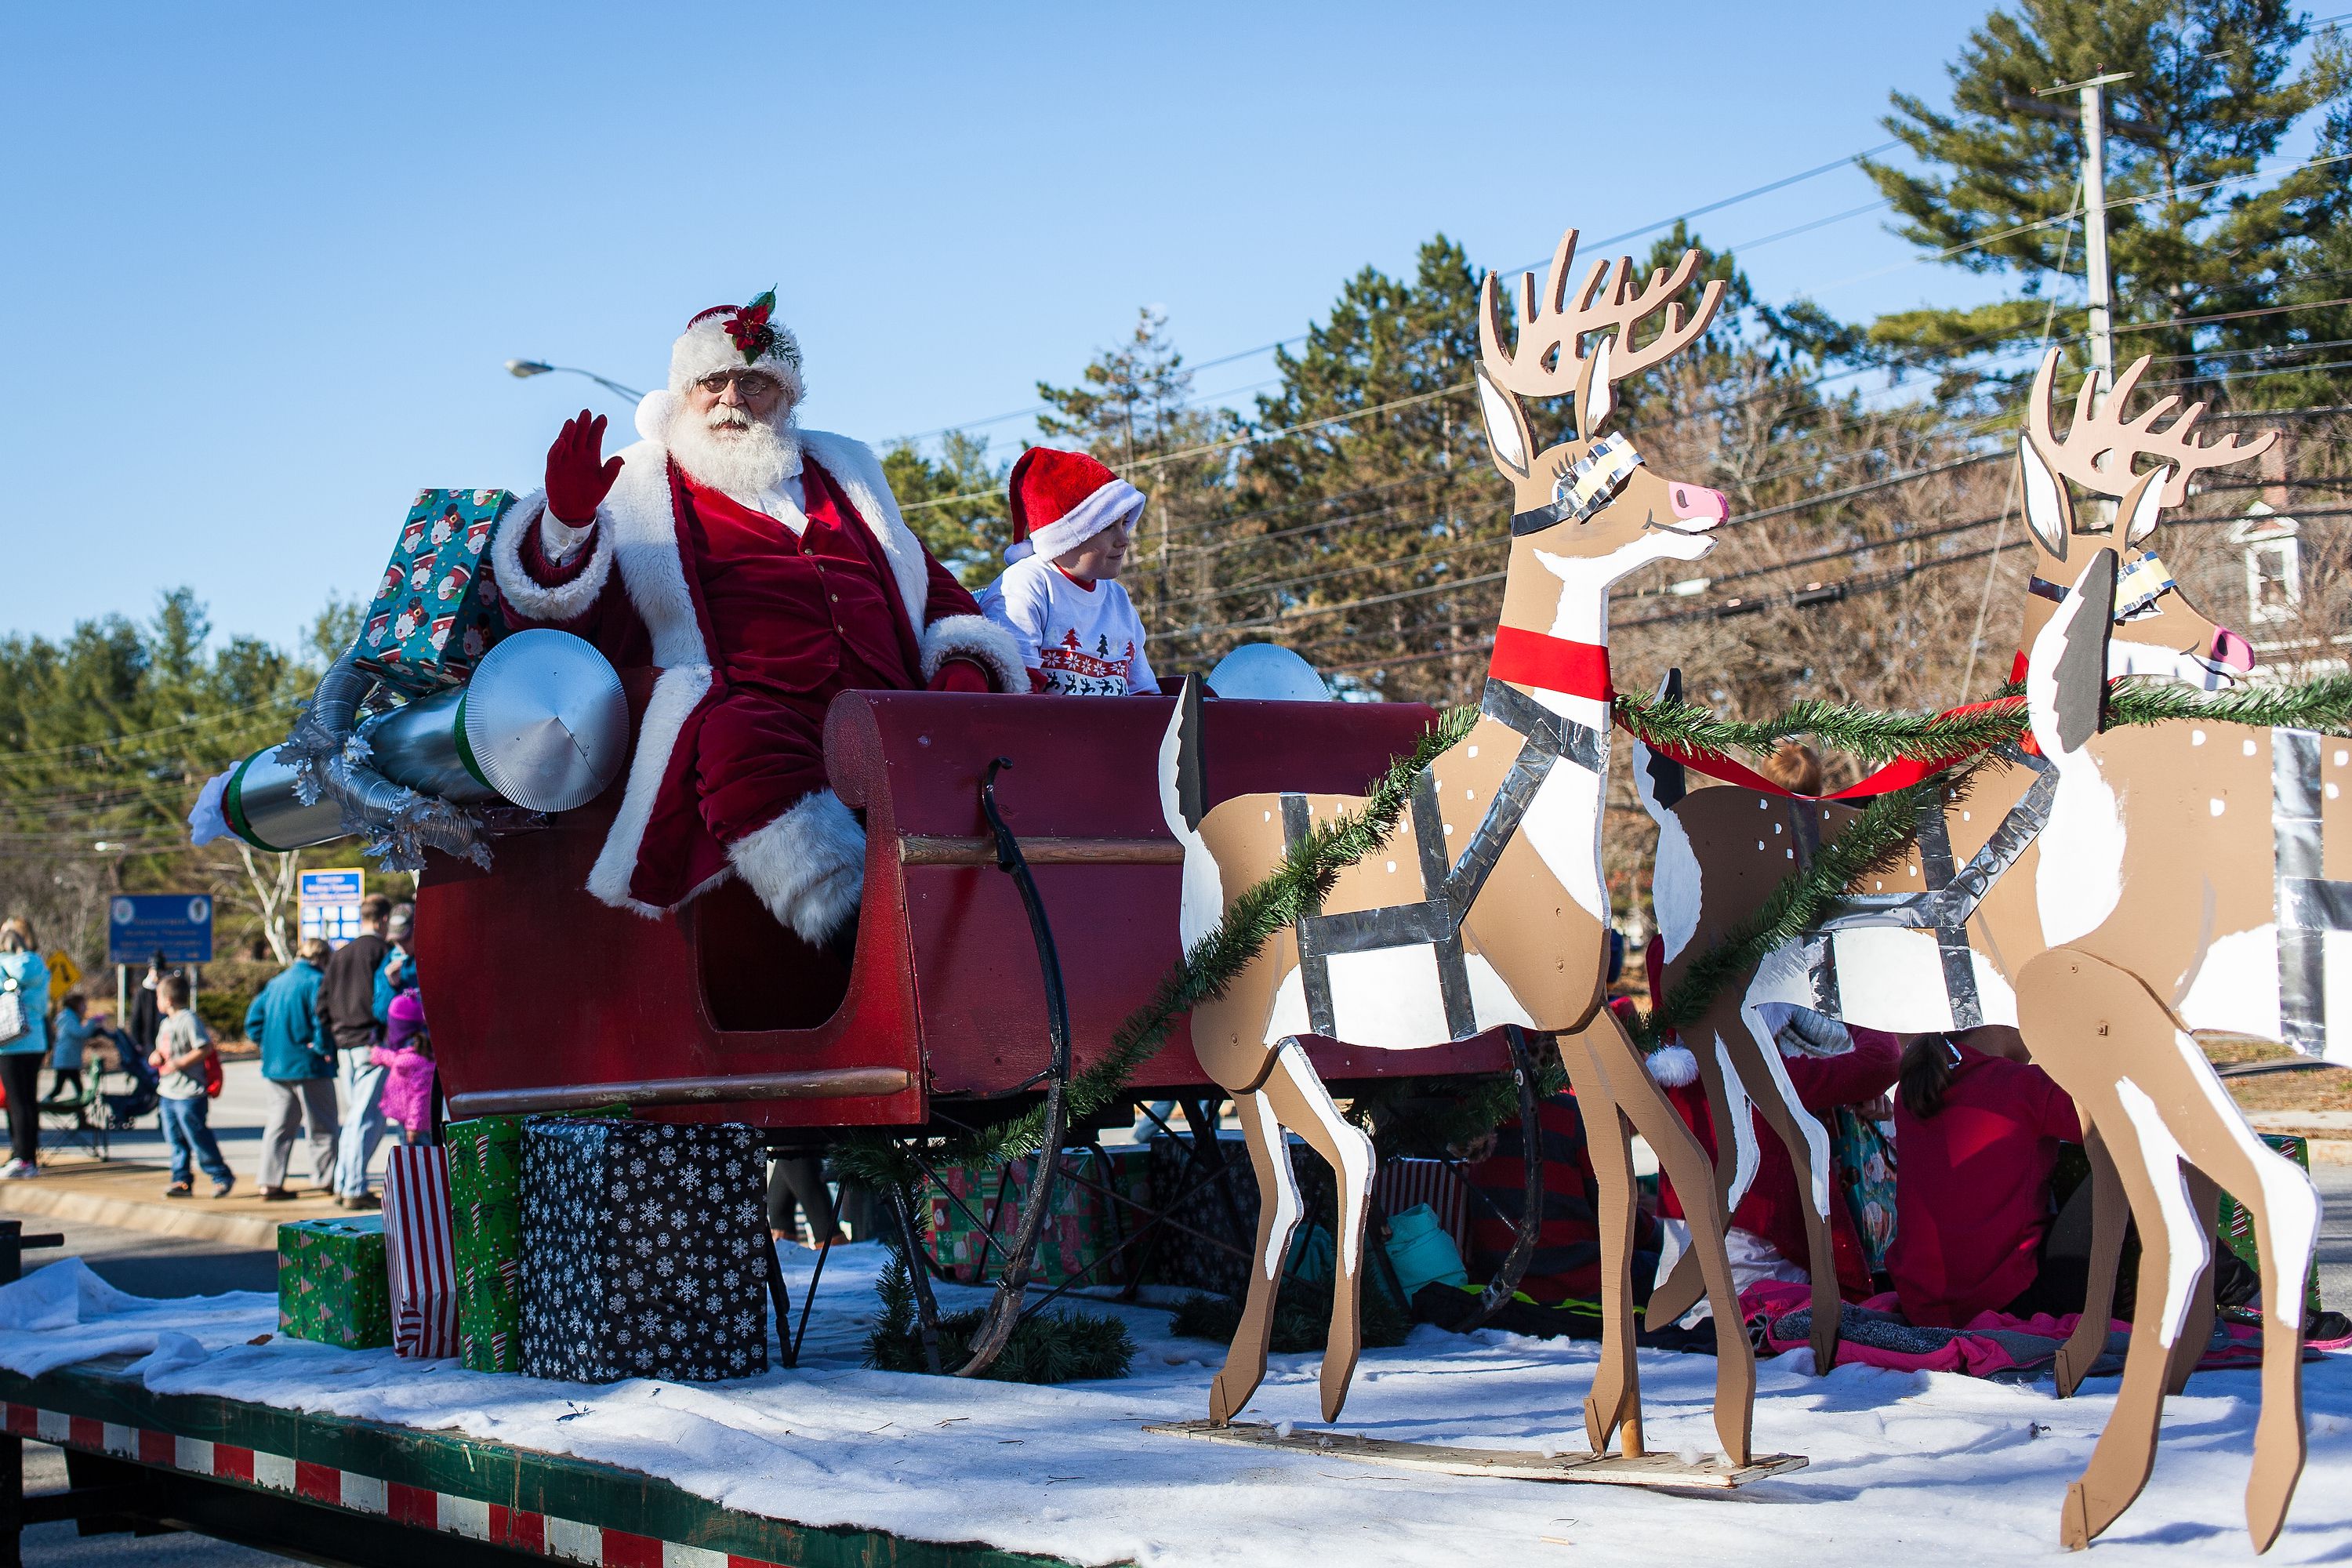 The Stove Barn Santa Claus float is seen in the annual Concord